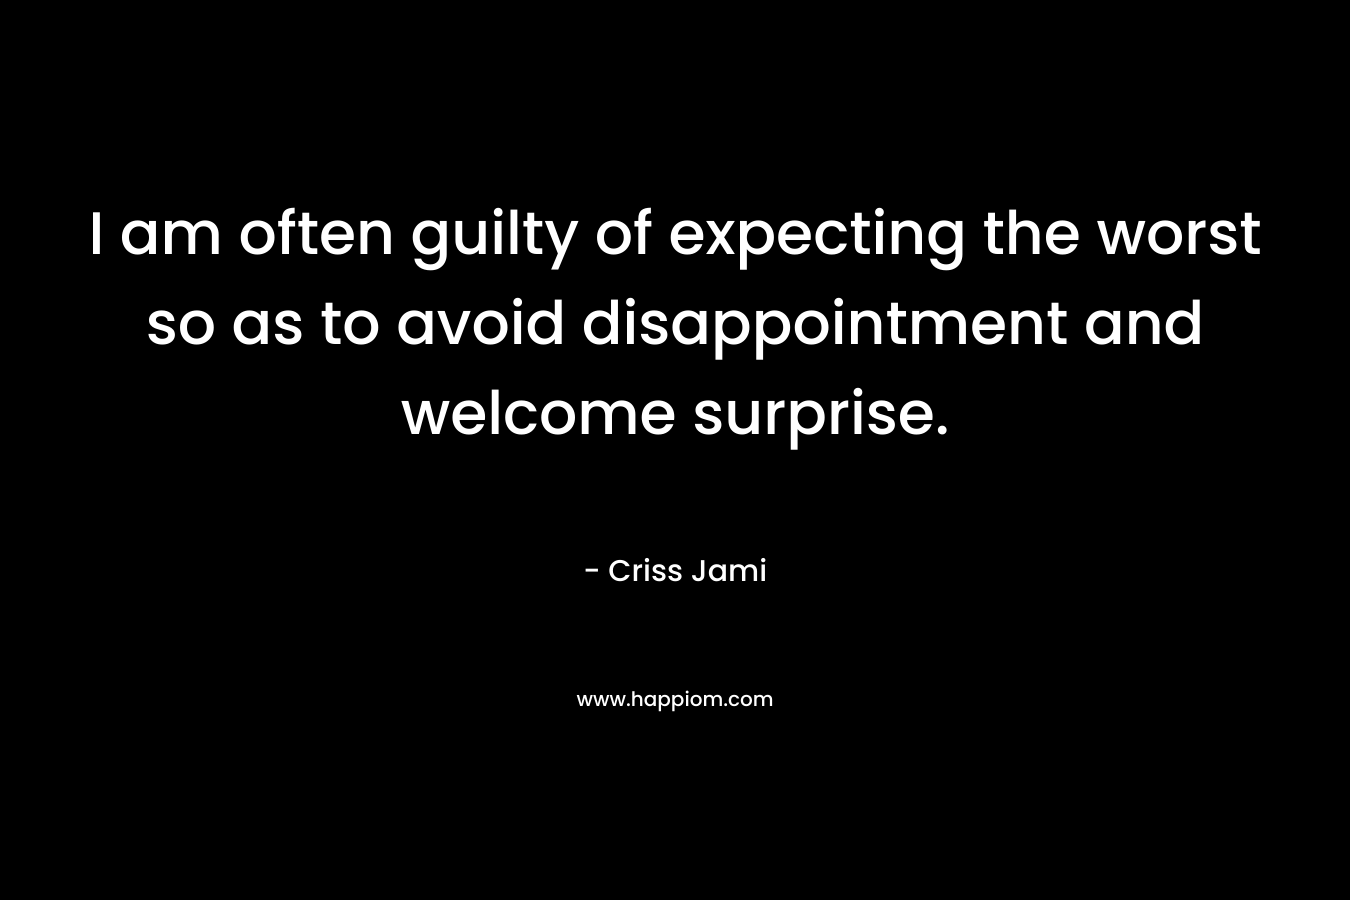 I am often guilty of expecting the worst so as to avoid disappointment and welcome surprise.